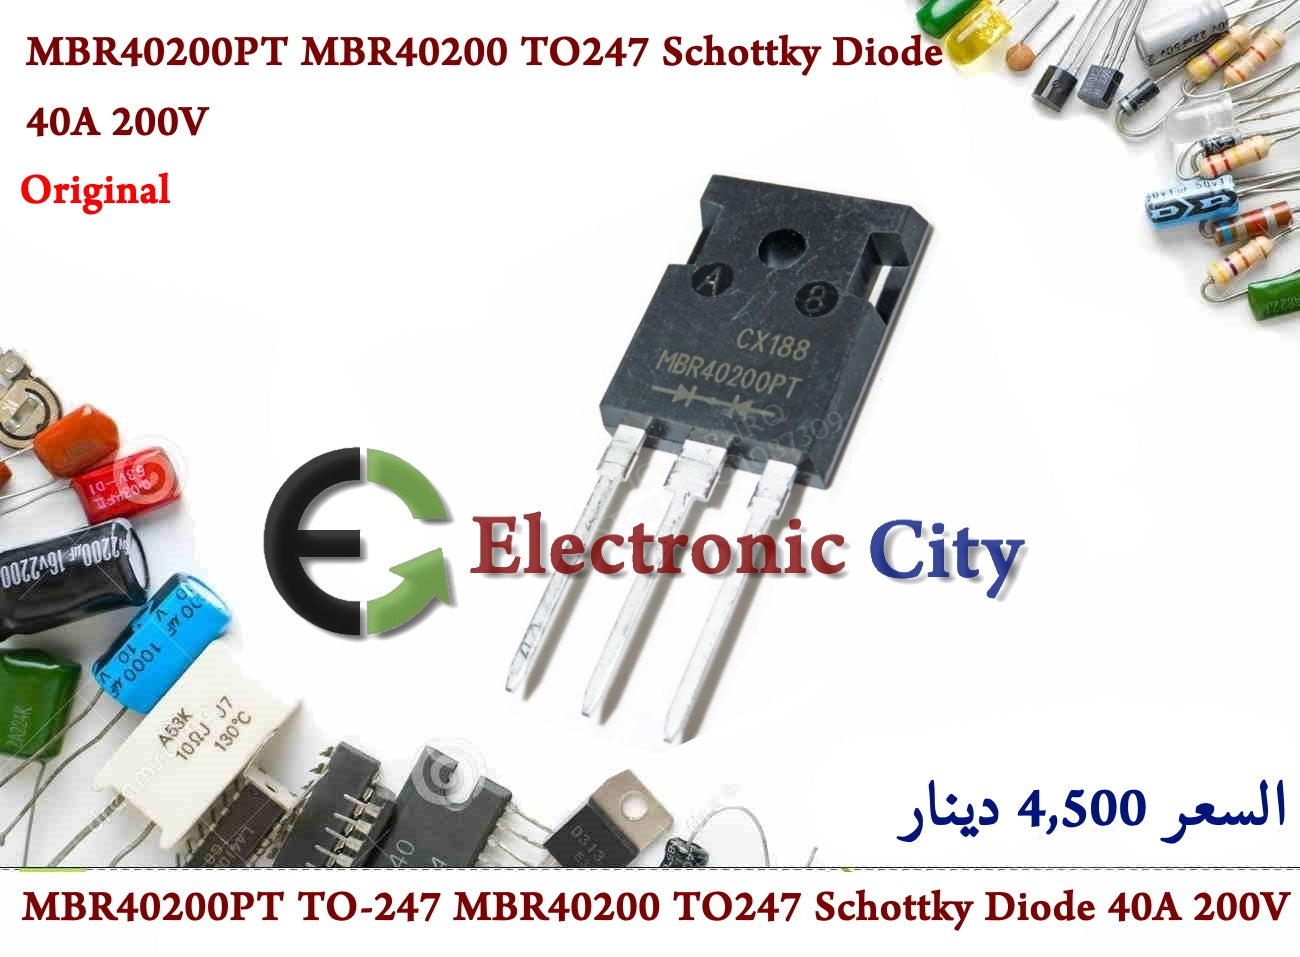 MBR40200PT TO-247 MBR40200 TO247 Schottky Diode 40A 200V